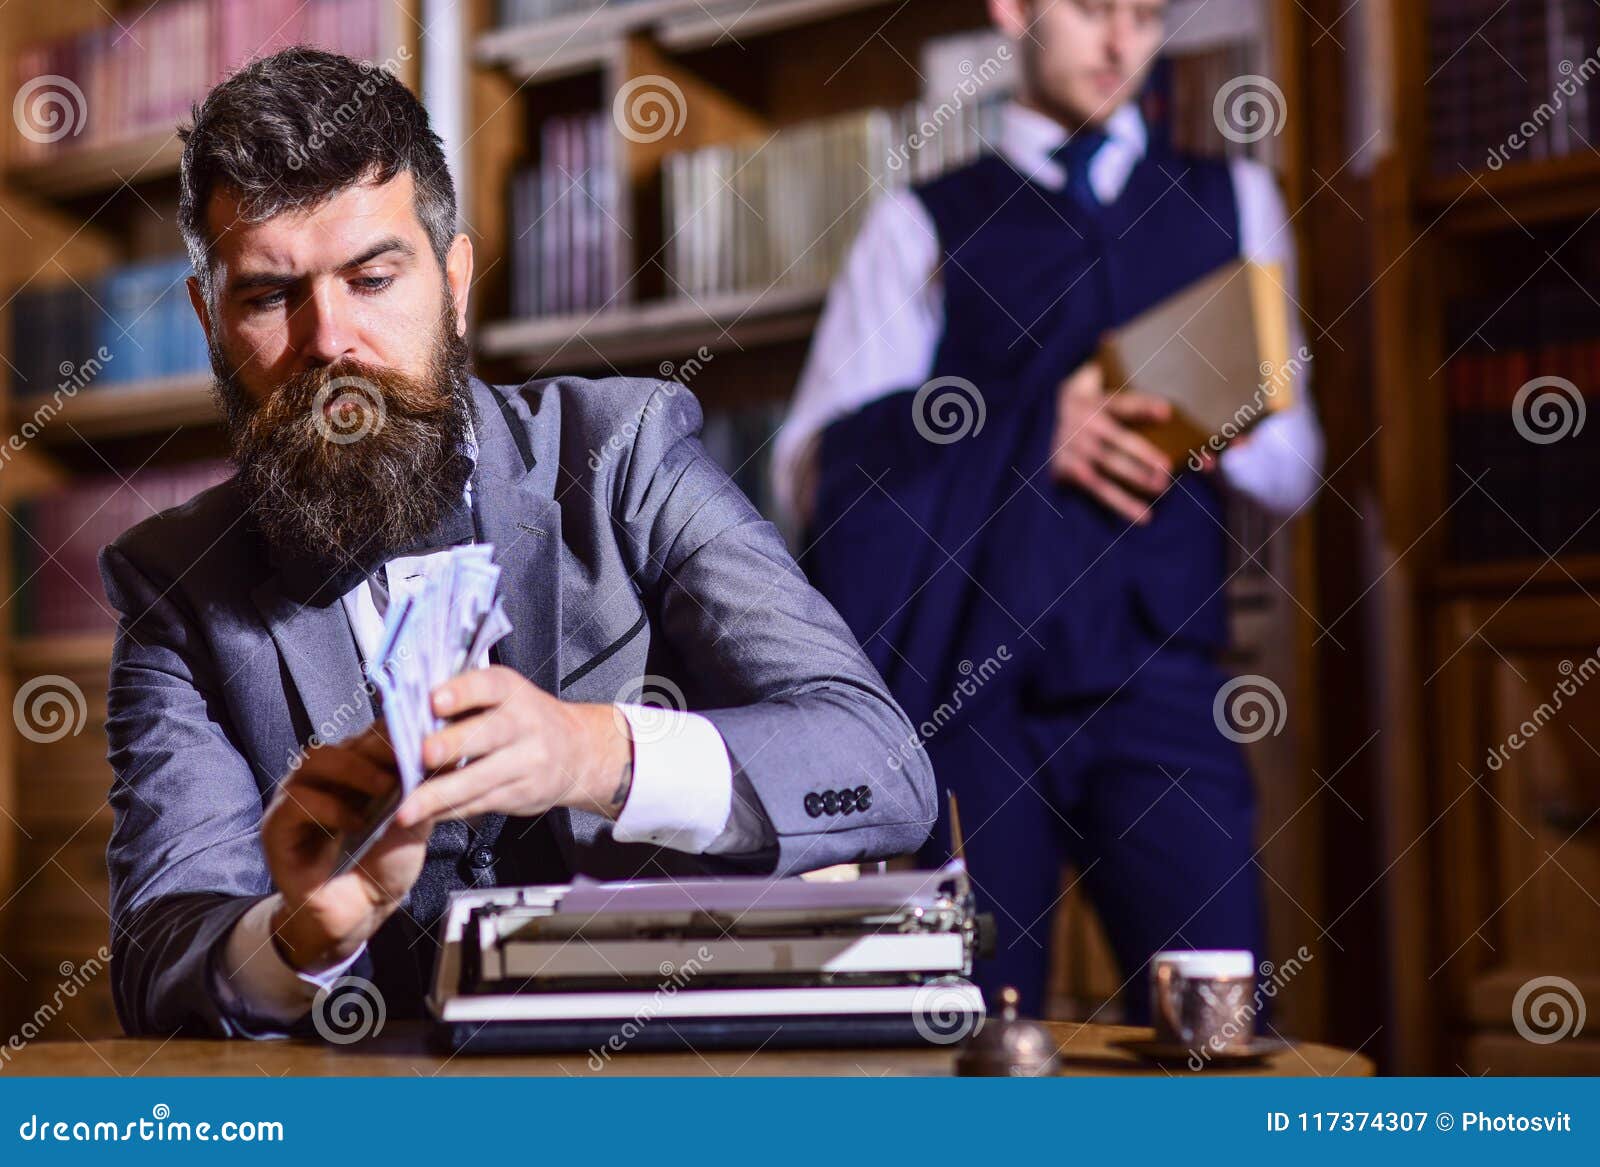 writing and fees concept. man in oldfashioned suit holds money.